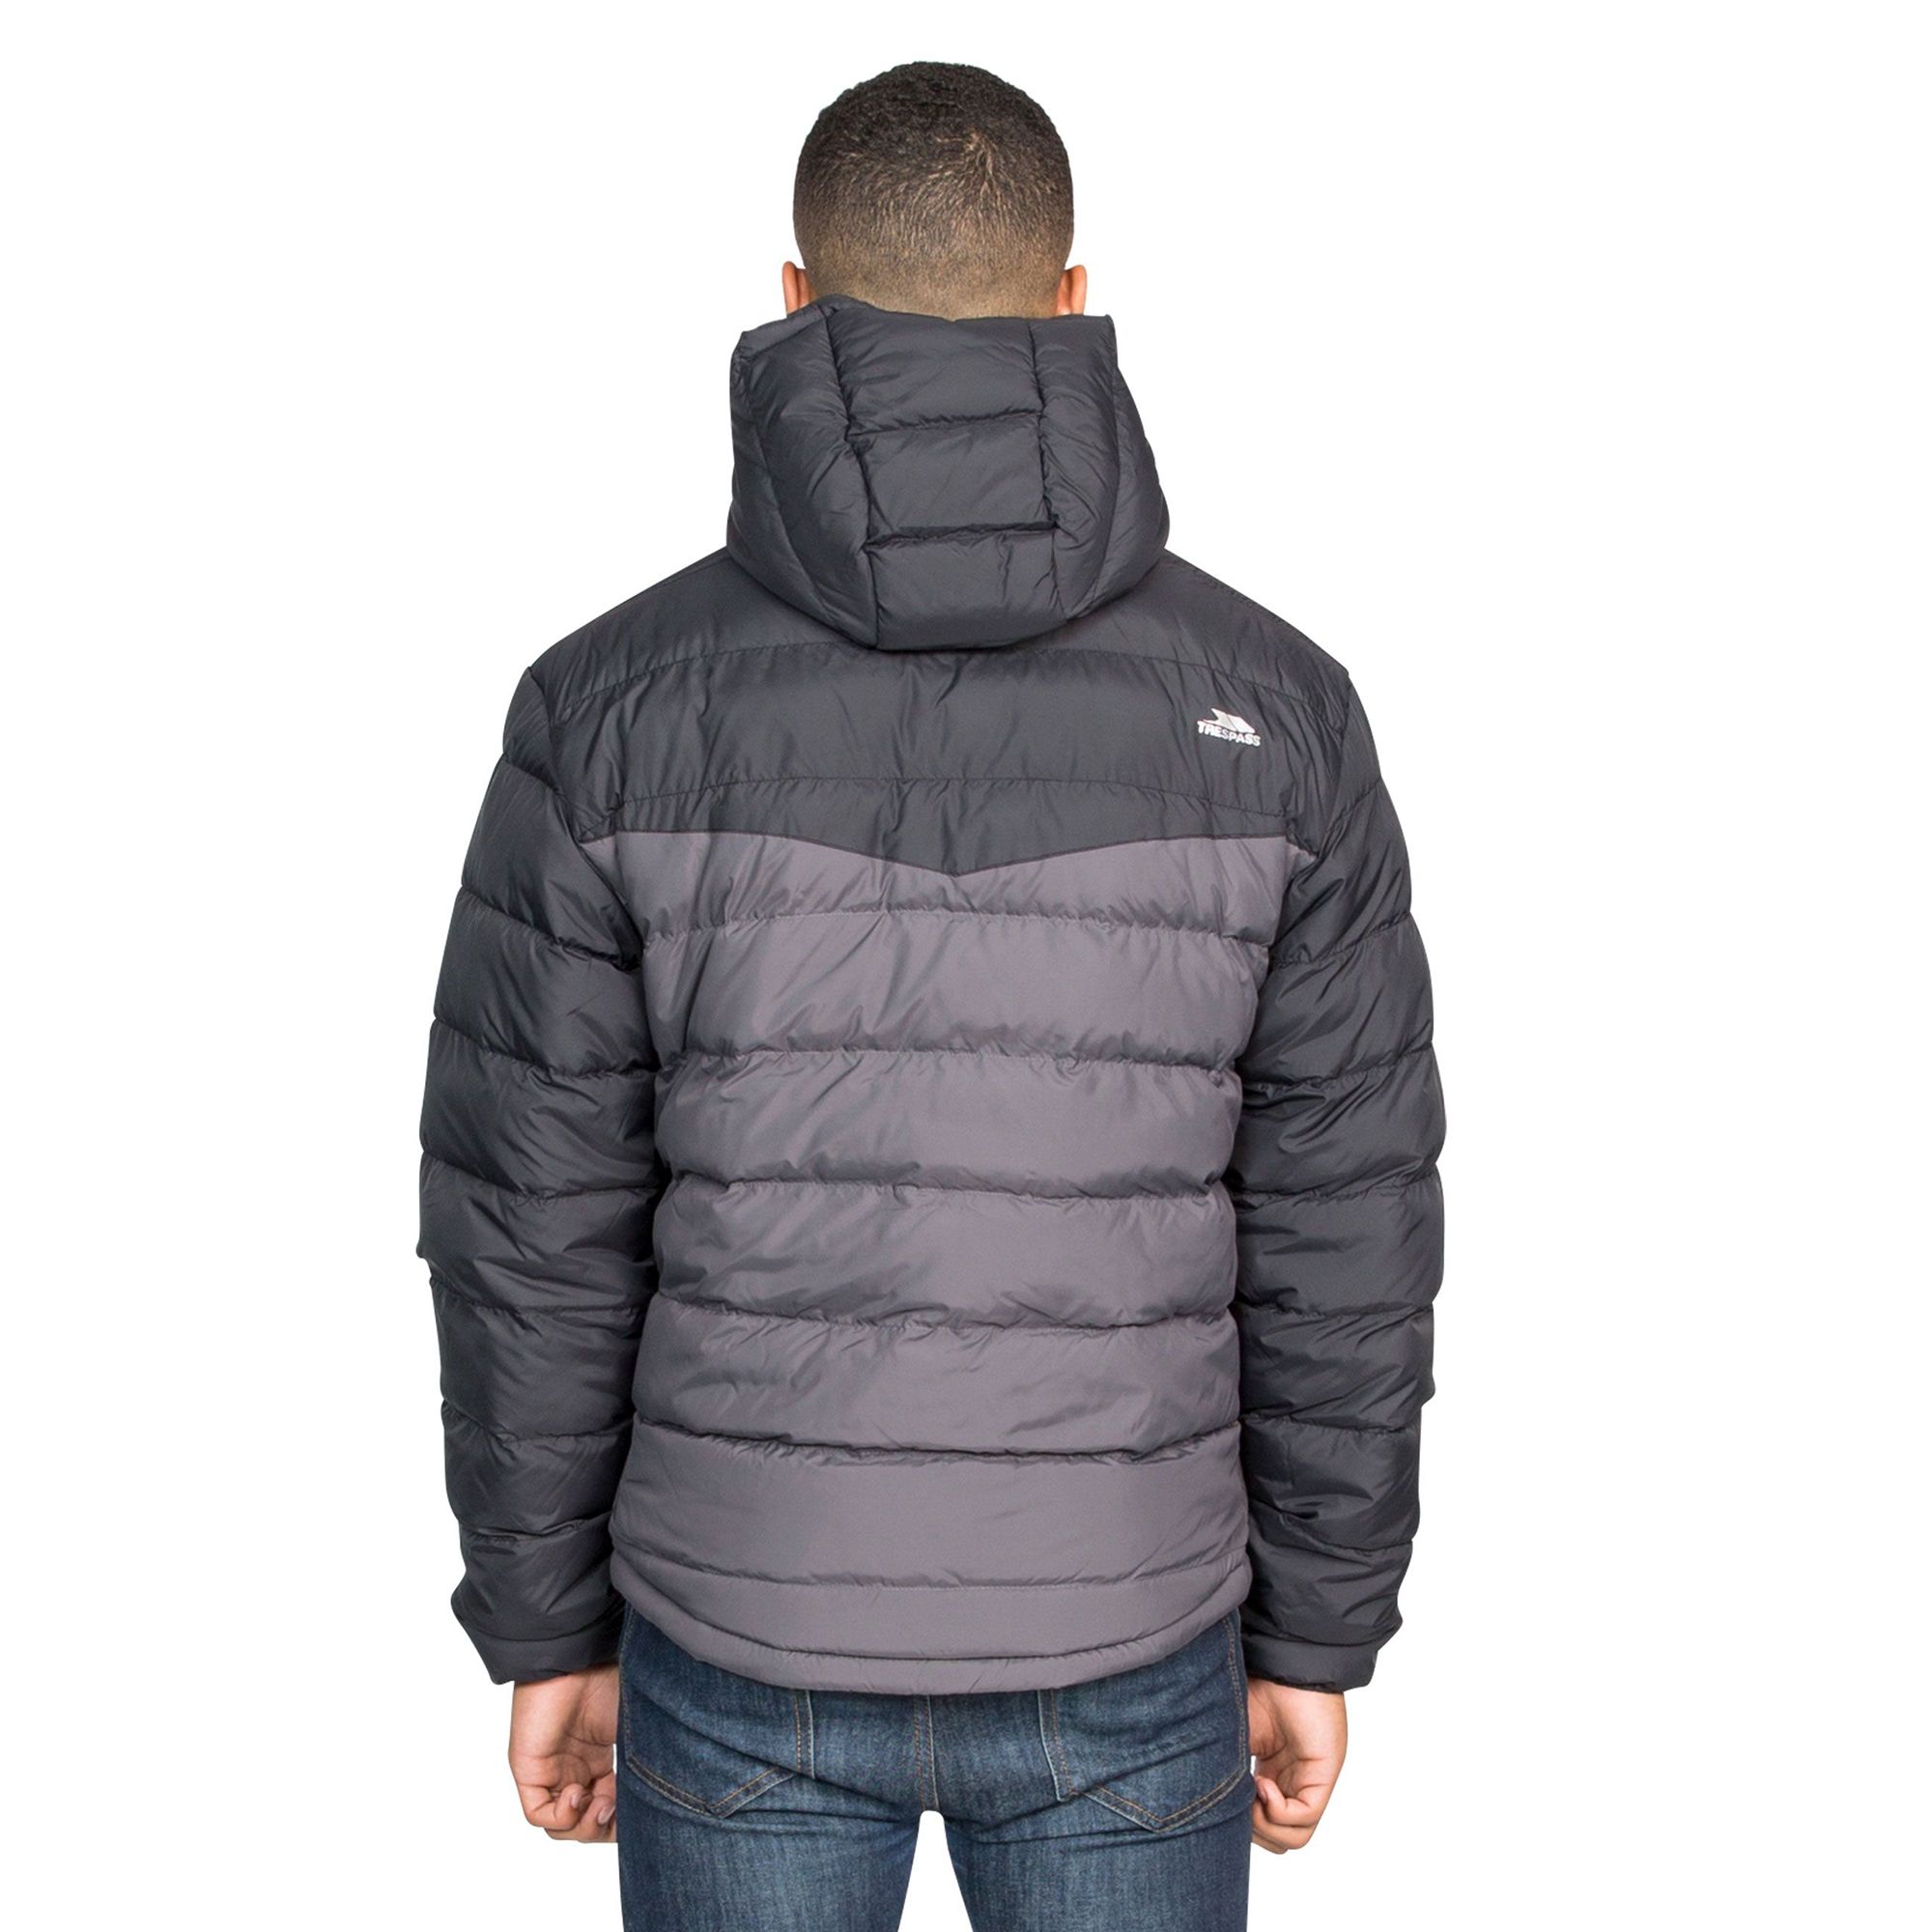 Shell: 100% Polyester, Lining: 100% Polyester, Filling: 100% Polyester. Water-resistant. Wind-resistant. Padded. Quilted jacket grown on hood. 2 pockets. Contrast zip. Elasticated rounded dip at back.